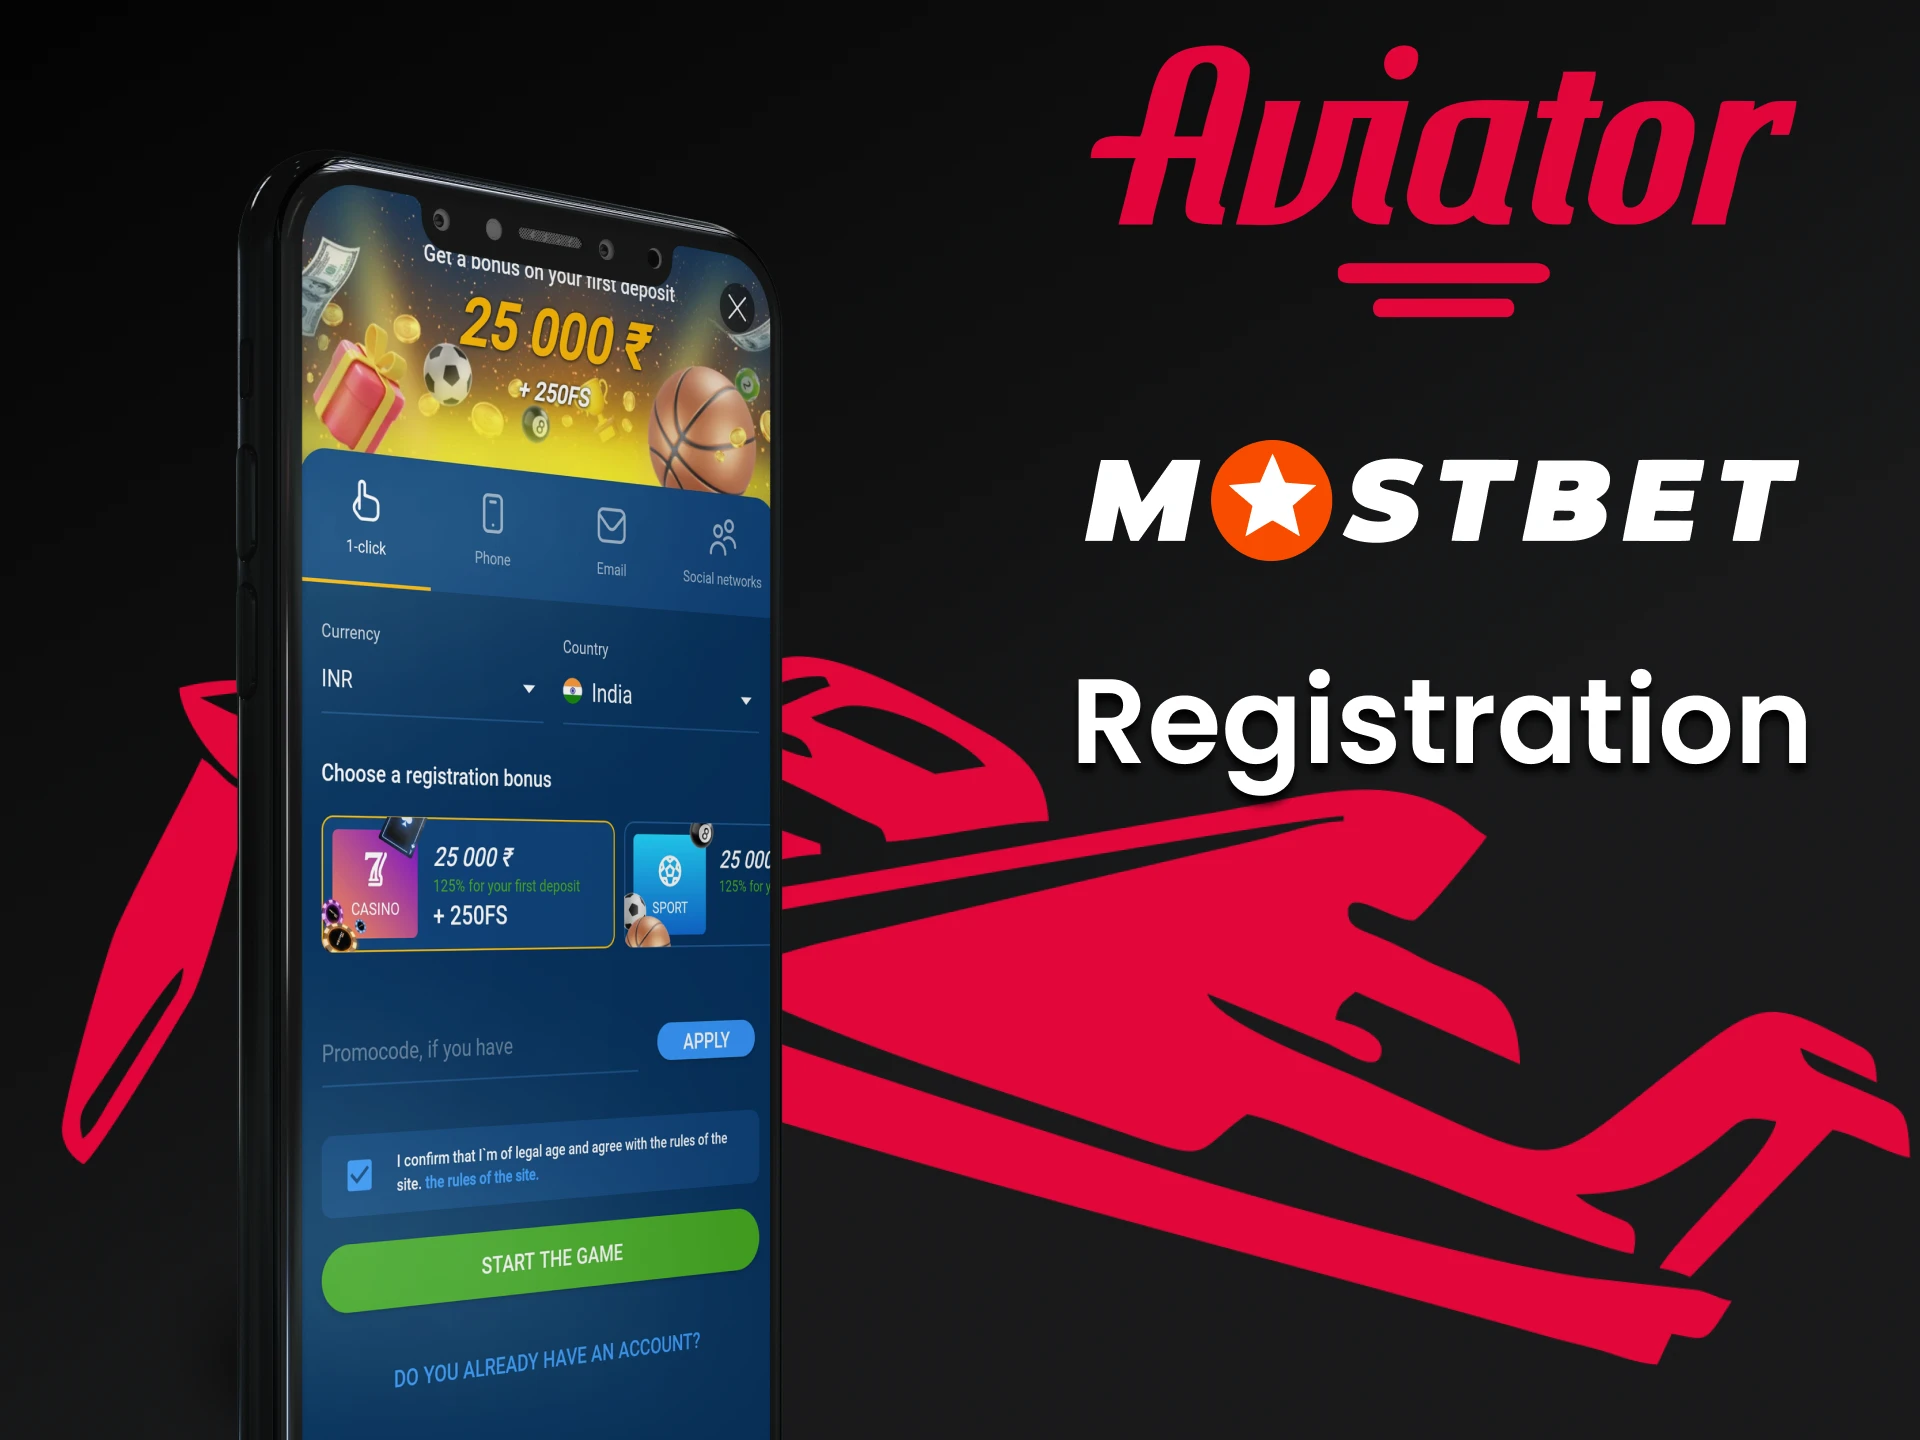 To start playing Aviator on Mostbet, create an account.